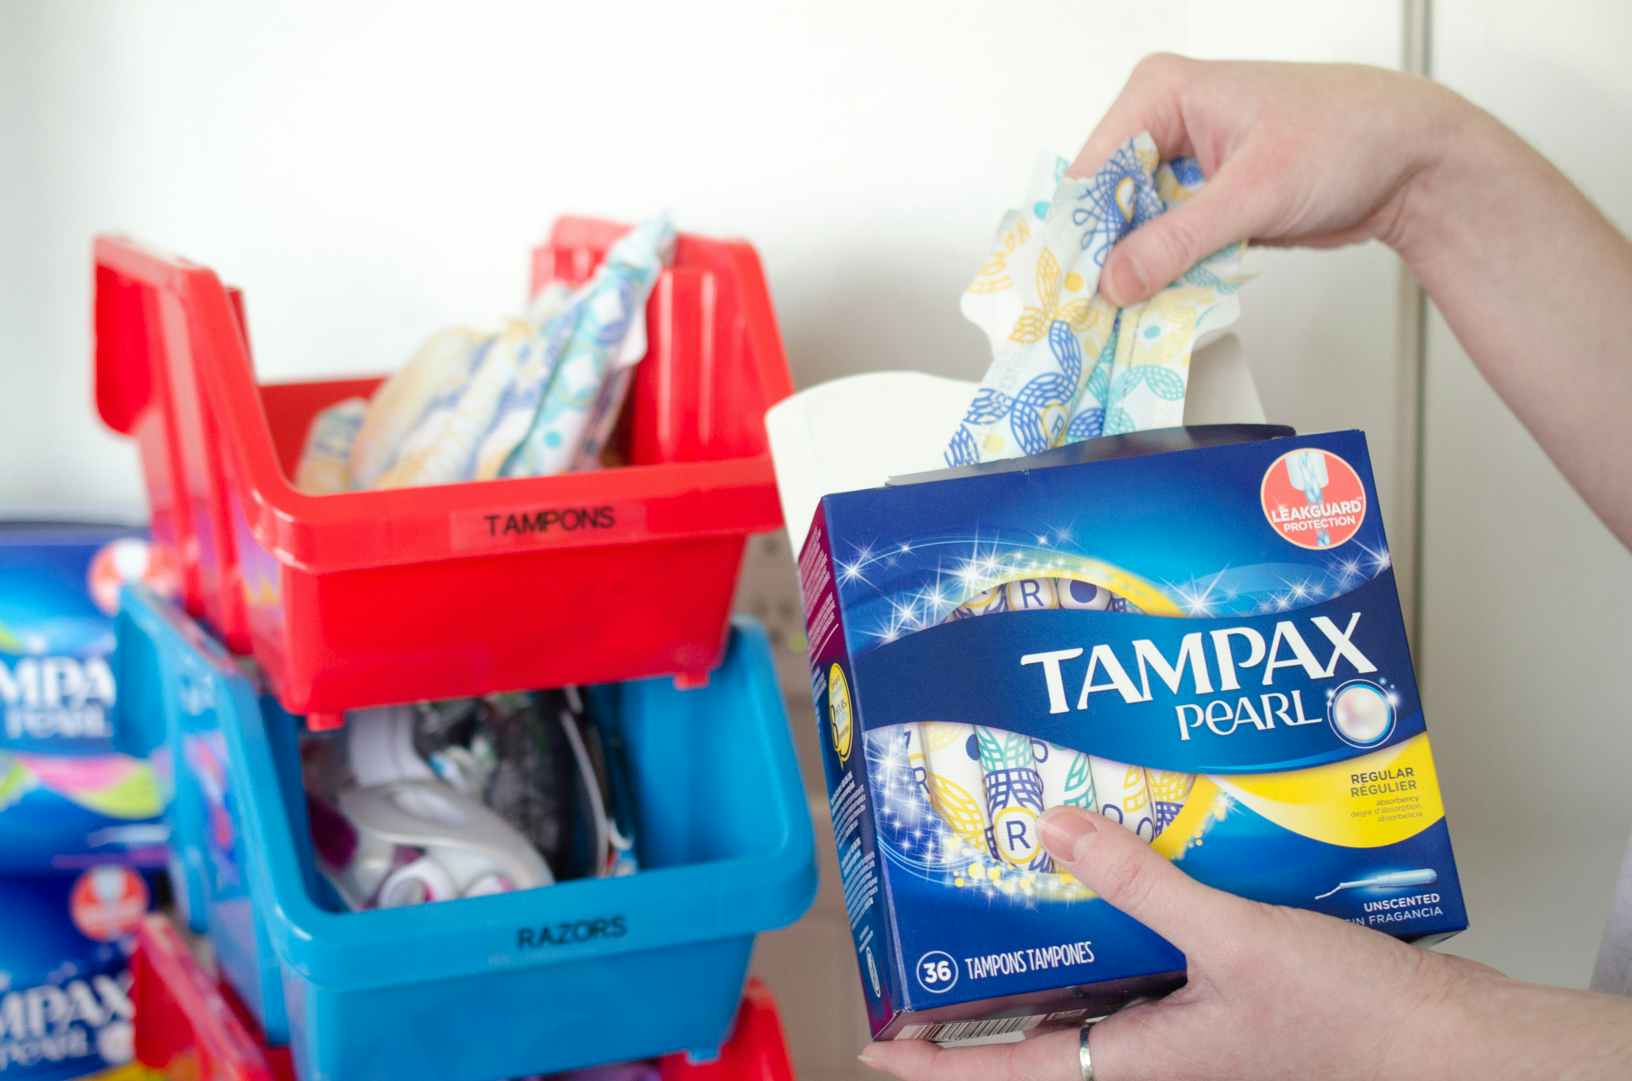 A woman removing tampons from the packaging and storing them in plastic bins.